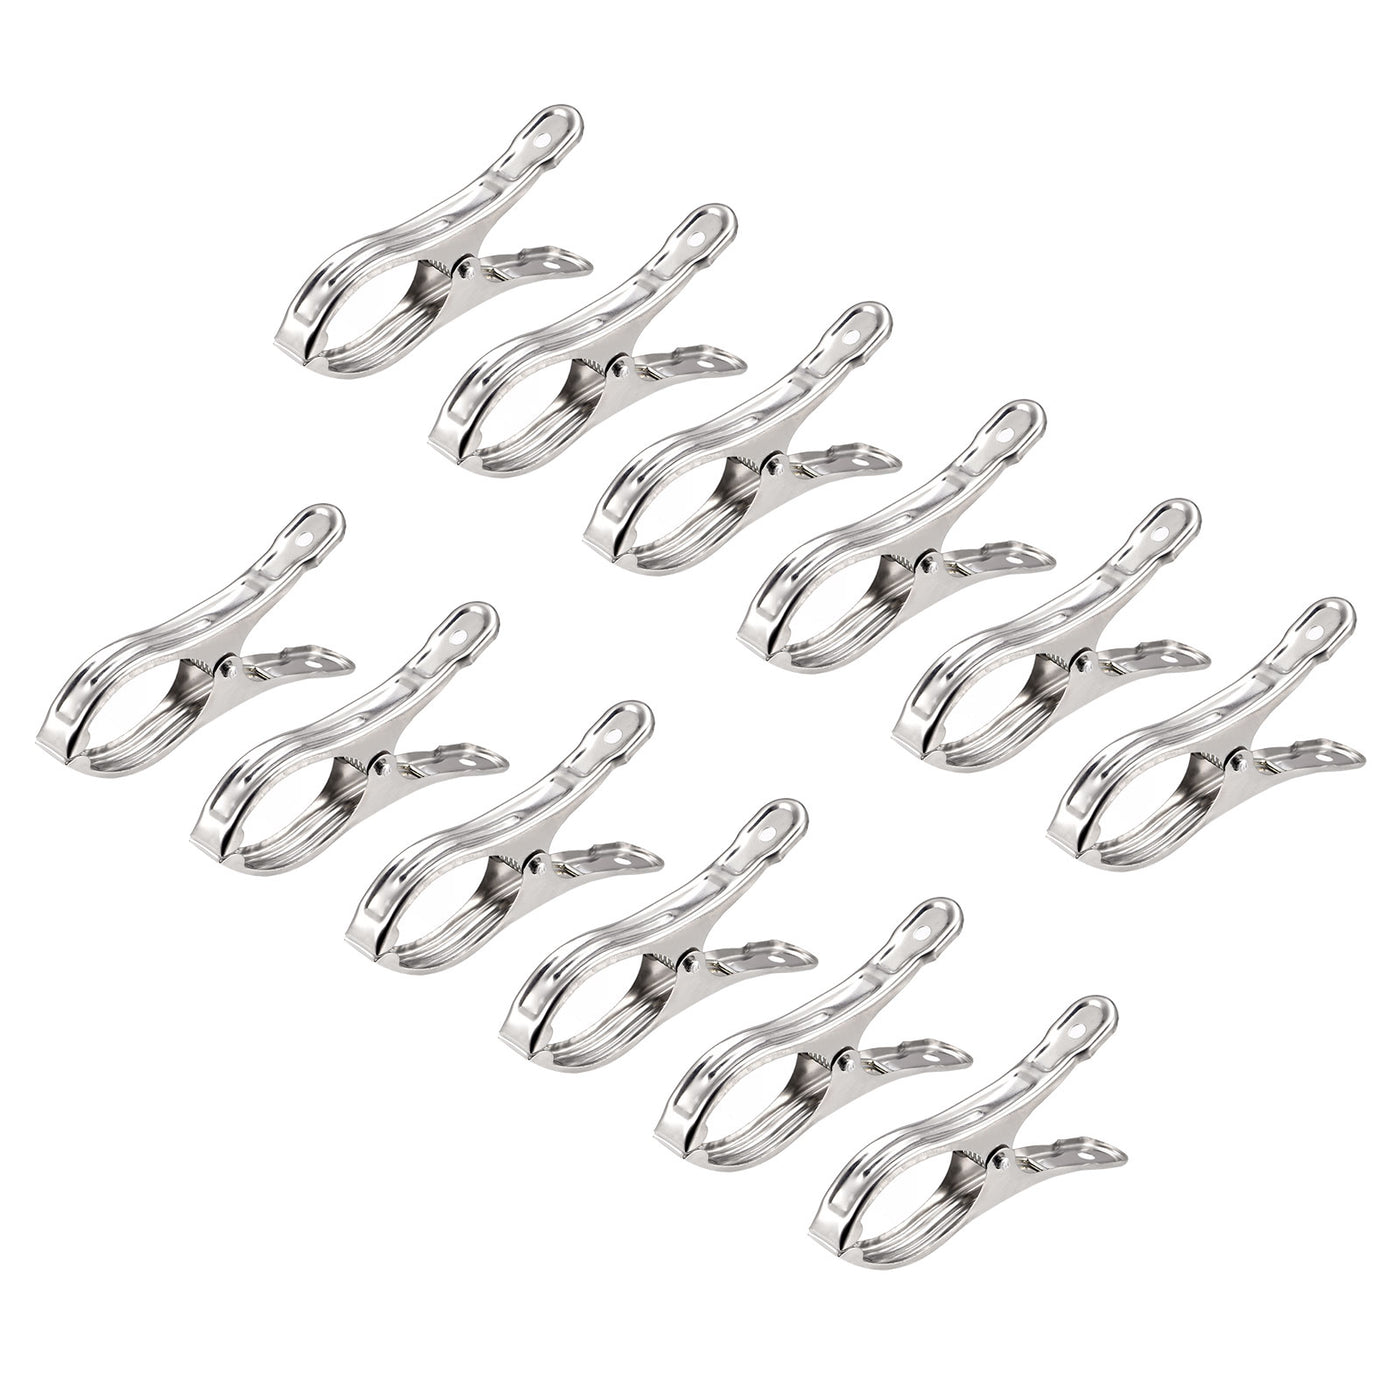 uxcell Uxcell Tablecloth Clips - 90mm Stainless Steel Clamps for Fixing Table Cloth Hanging Clothes, 12 Pcs